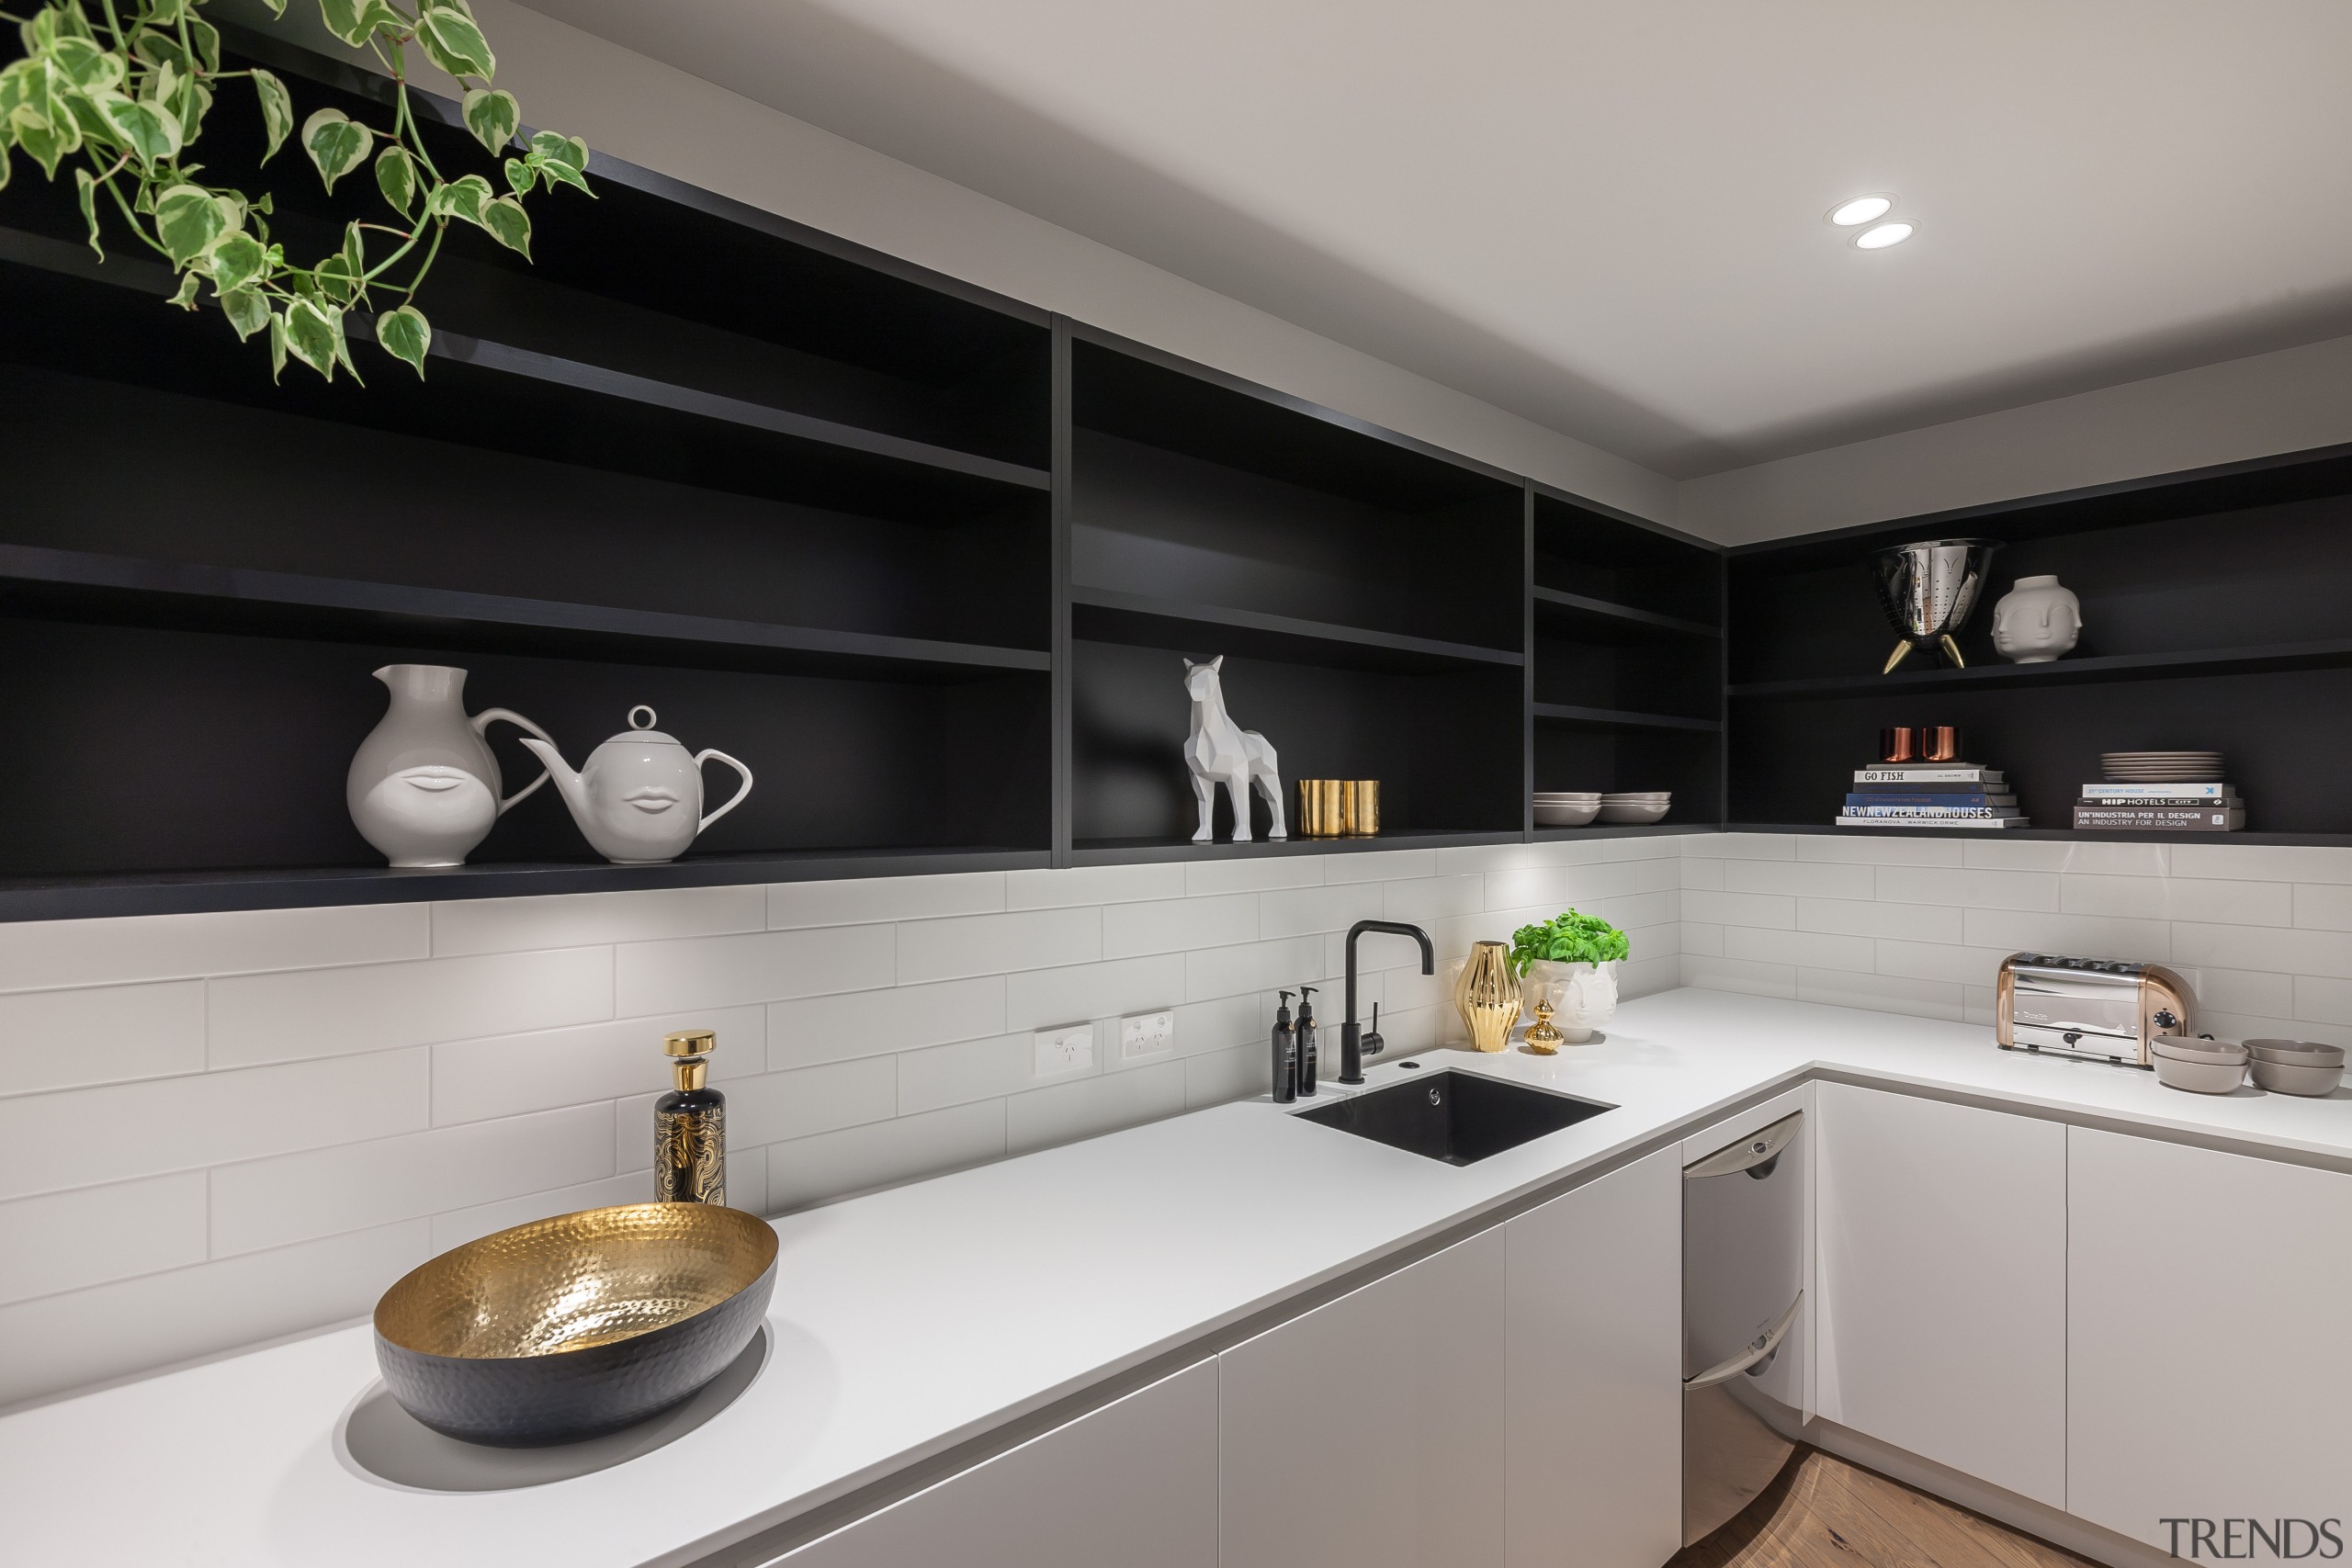 This walk-in scullery continues the look of the countertop, interior design, kitchen, gray, black